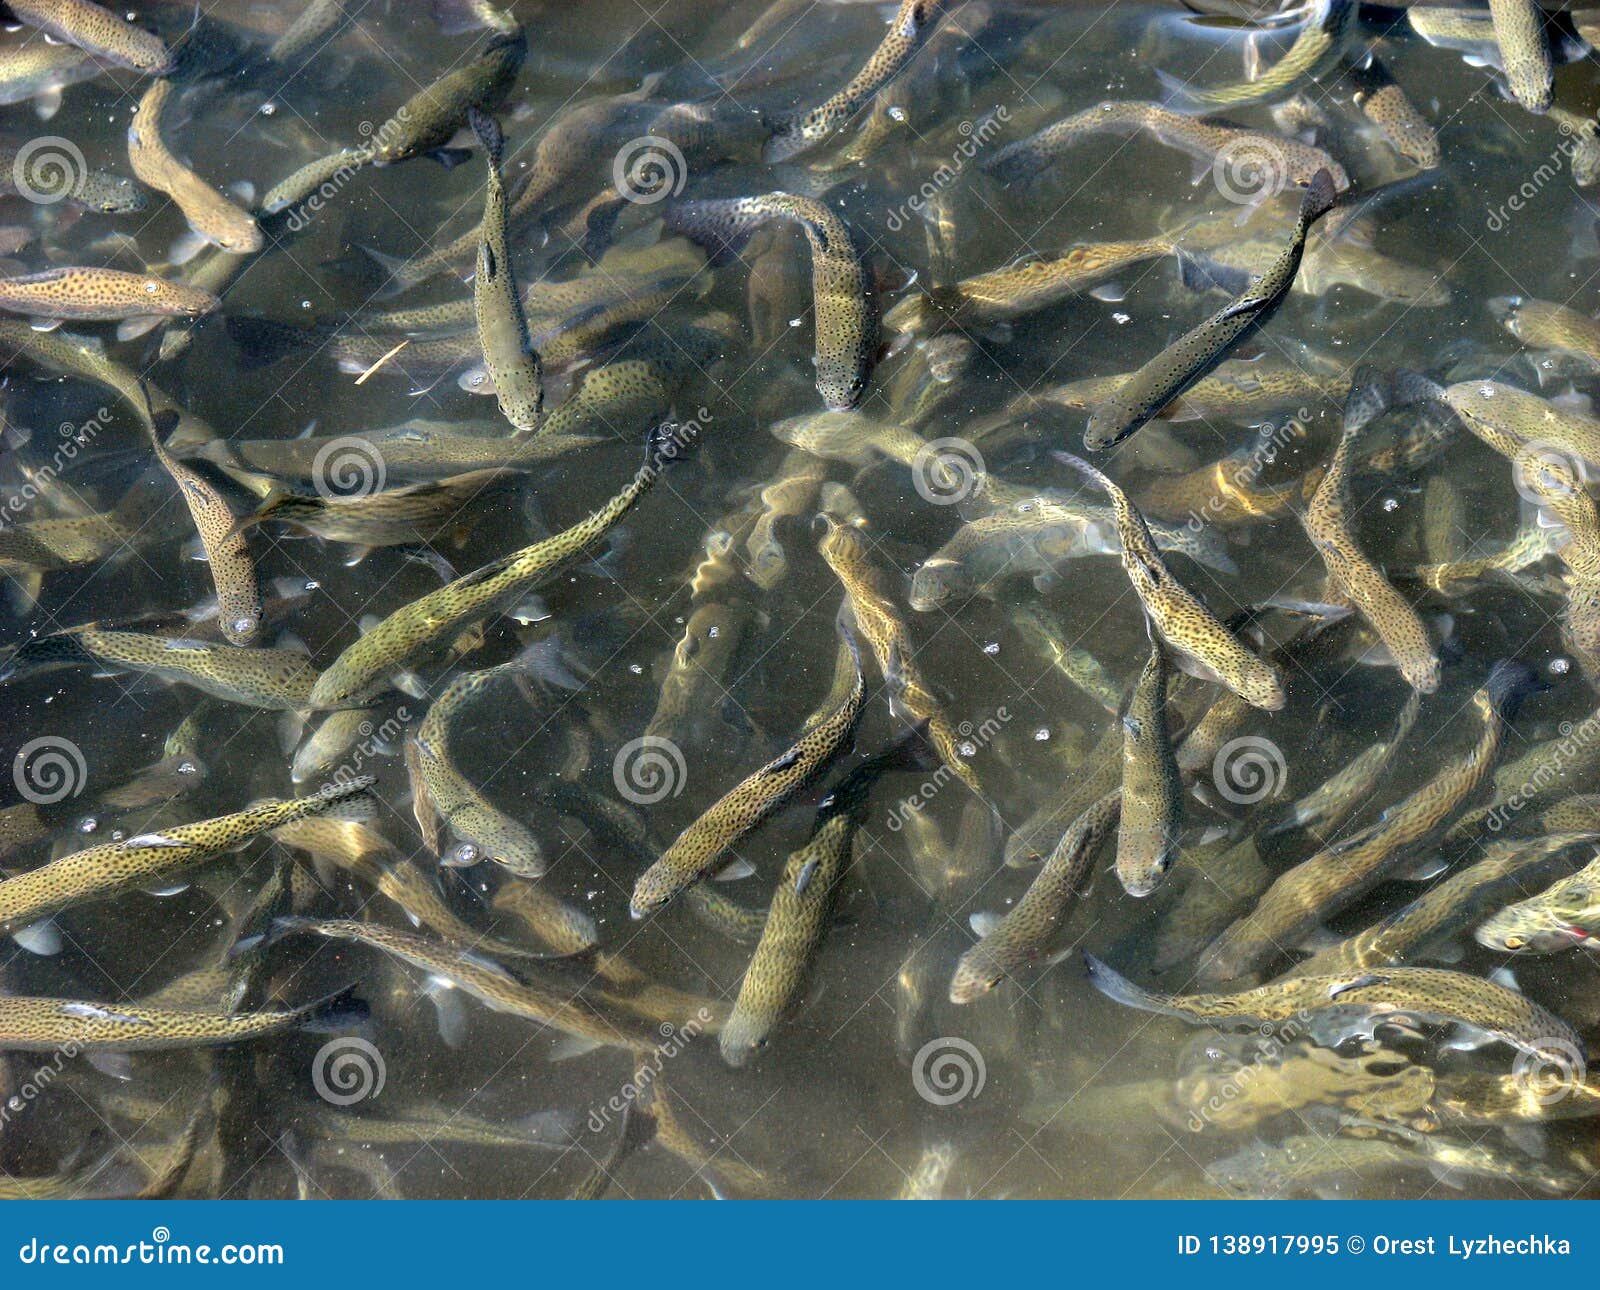 A trout flock in a pond stock image. Image of river - 138917995